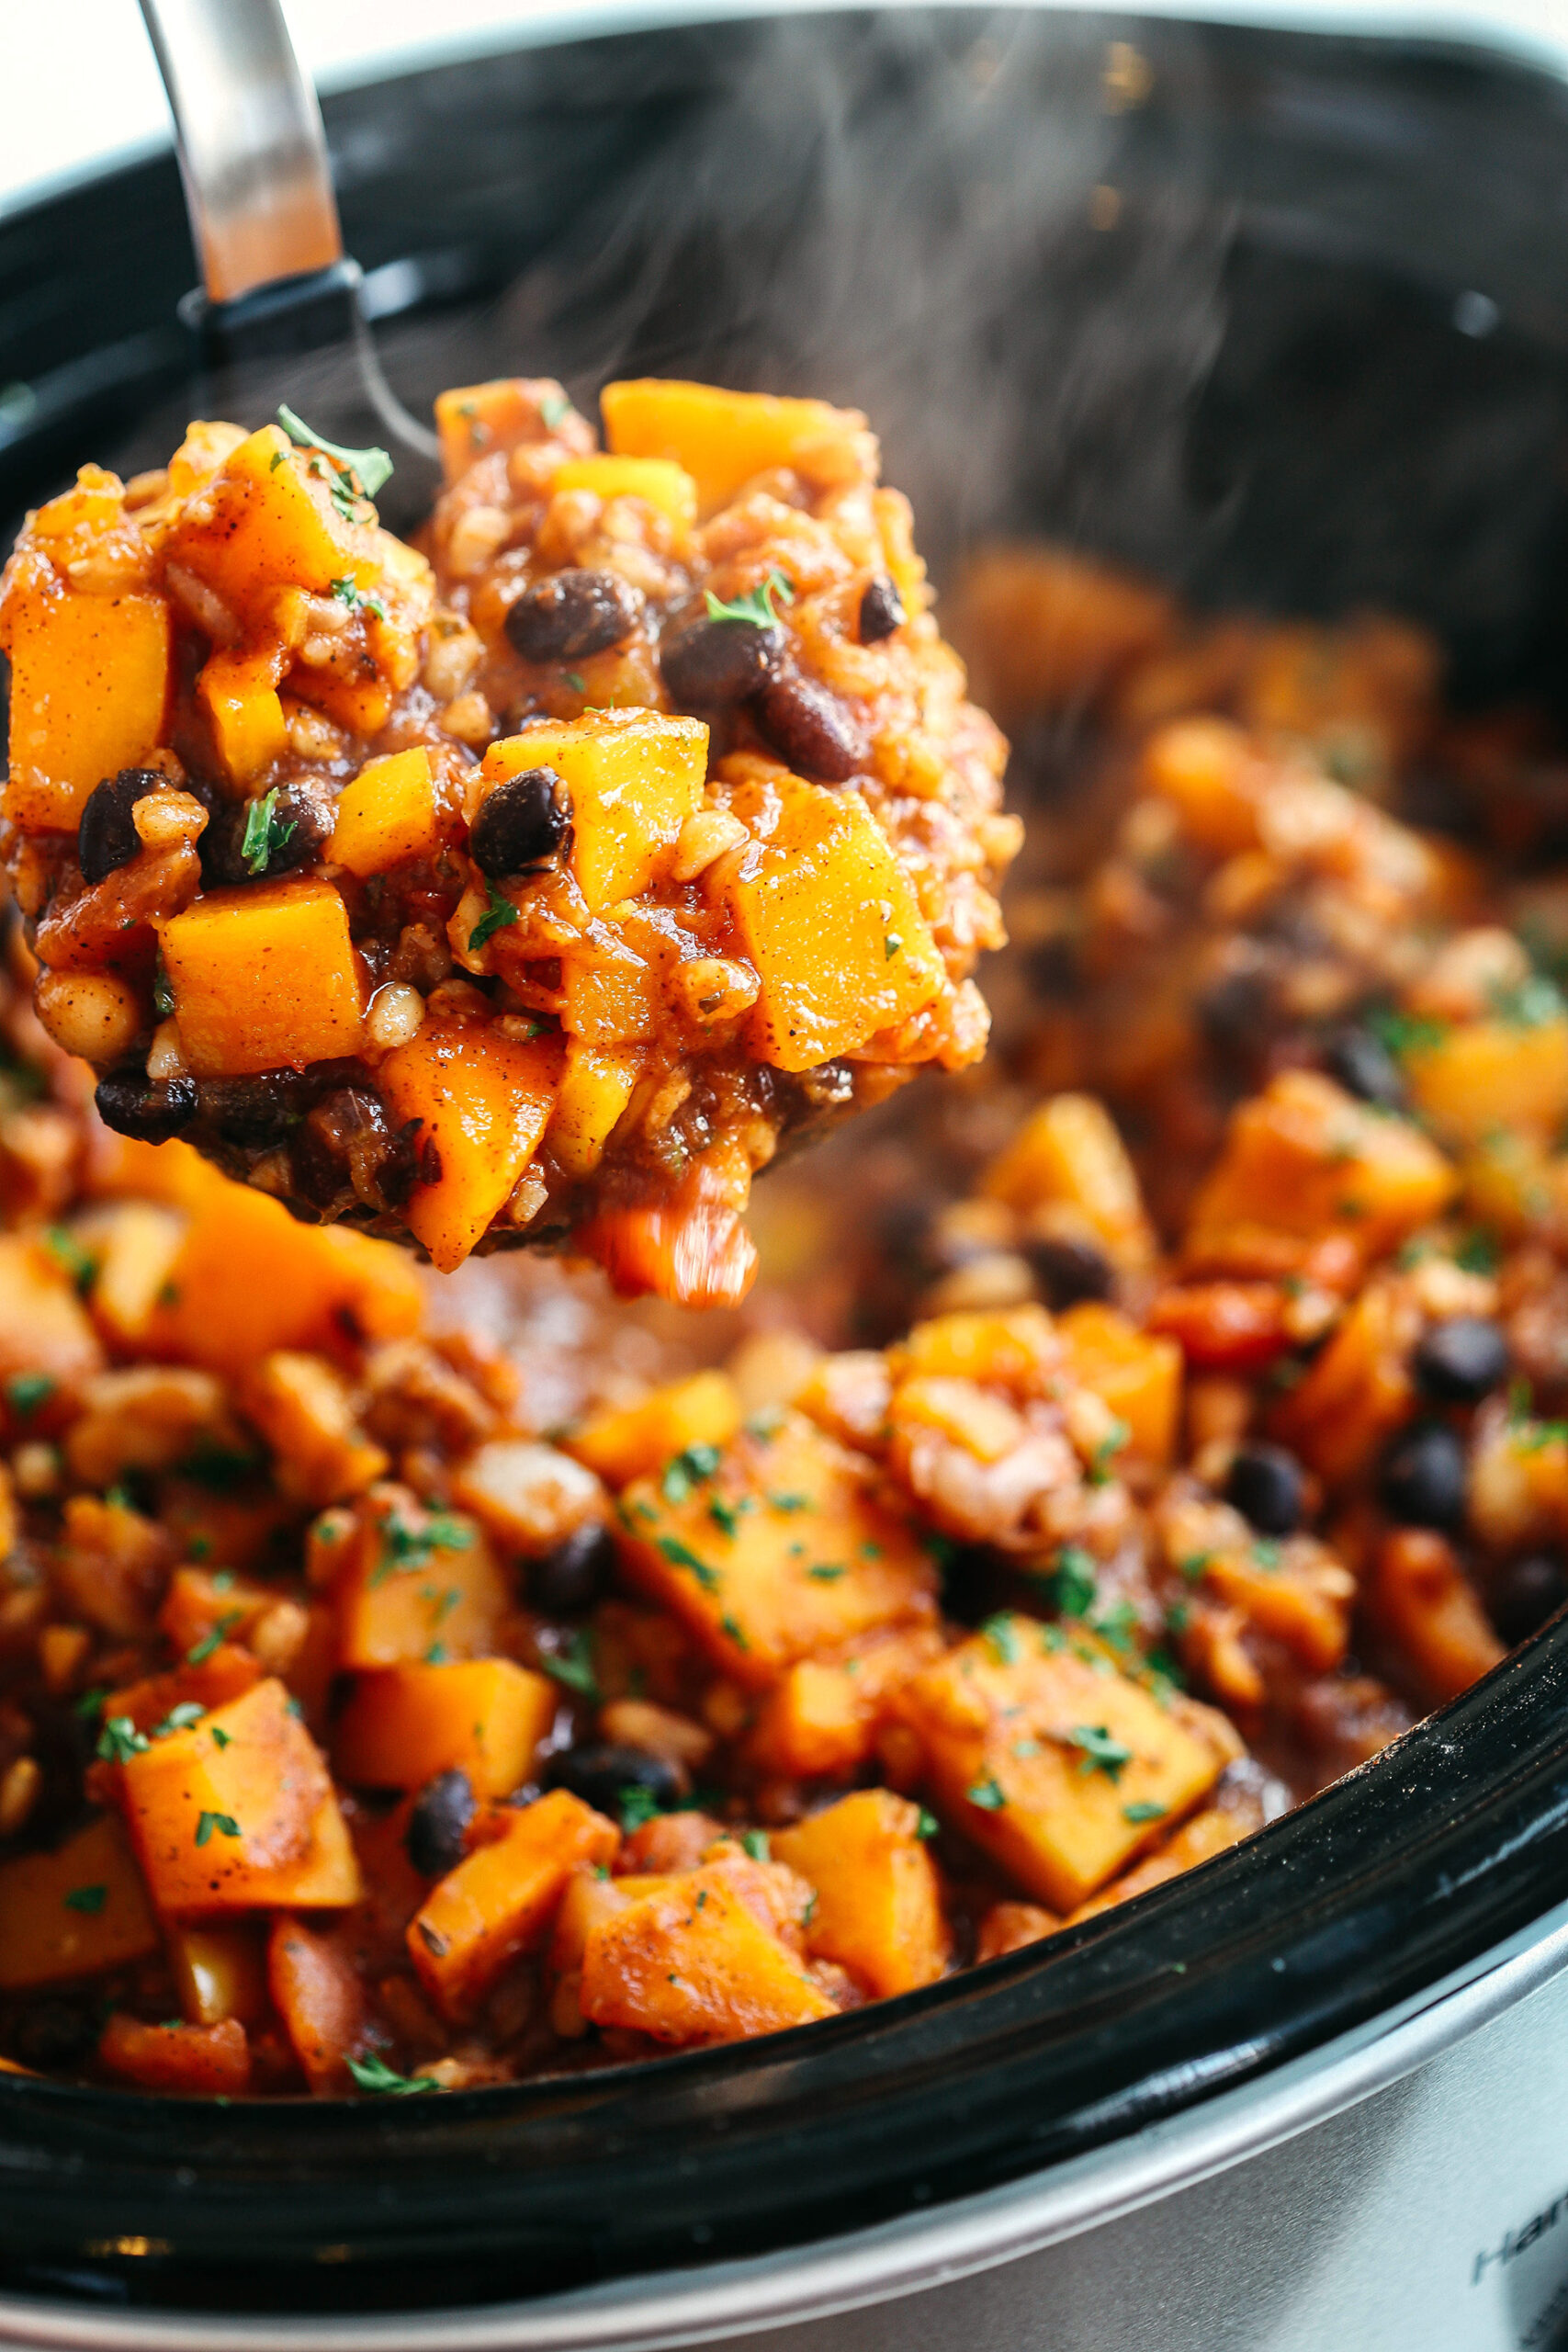 This Slow Cooker Butternut Squash and Farro Chili is hearty, healthy and loaded with seasonal veggies, tender farro, protein-packed beans, and cozy spices all simmered together in a delicious broth for the perfect fall meal!